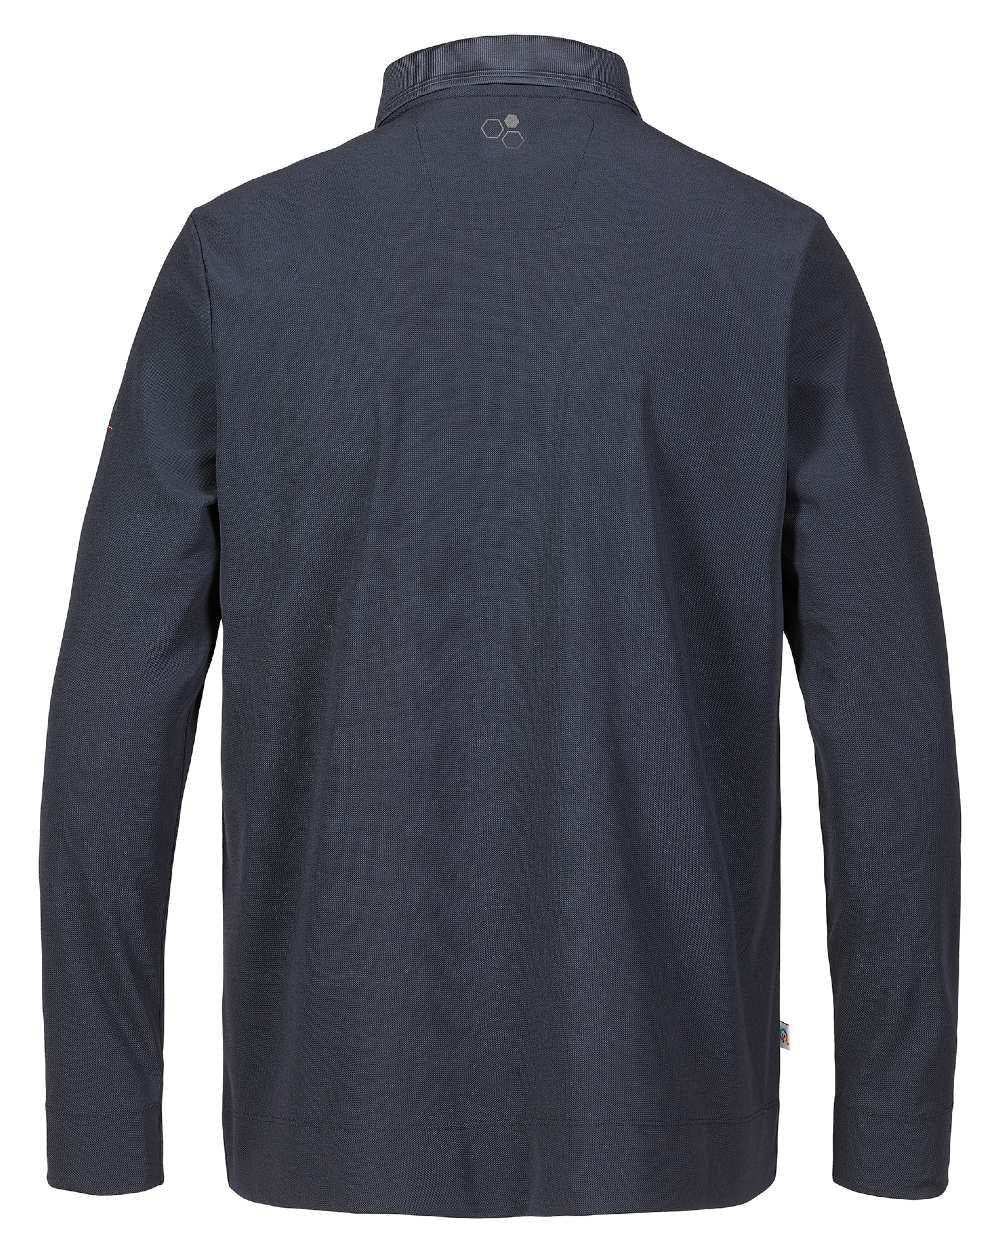 Navy Coloured Musto Mens Land Rover Edye Long Sleeve Polo Shirt On A White Background 